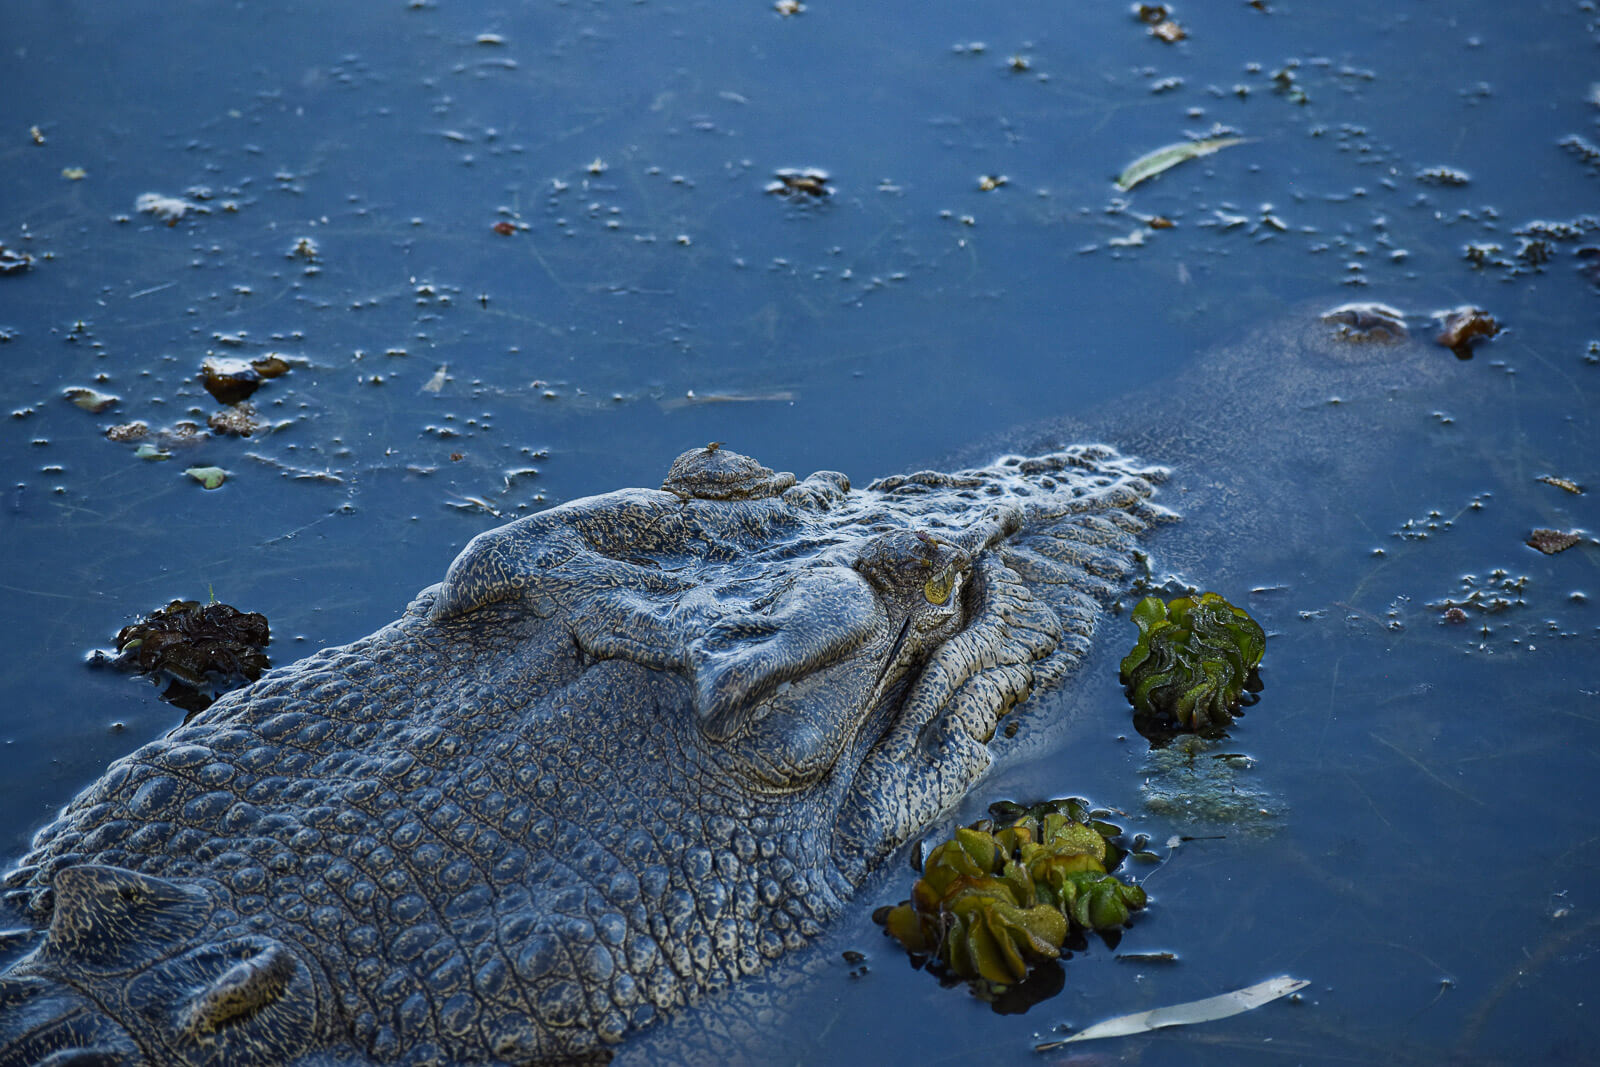 A large saltwater crocodile submerged under the water